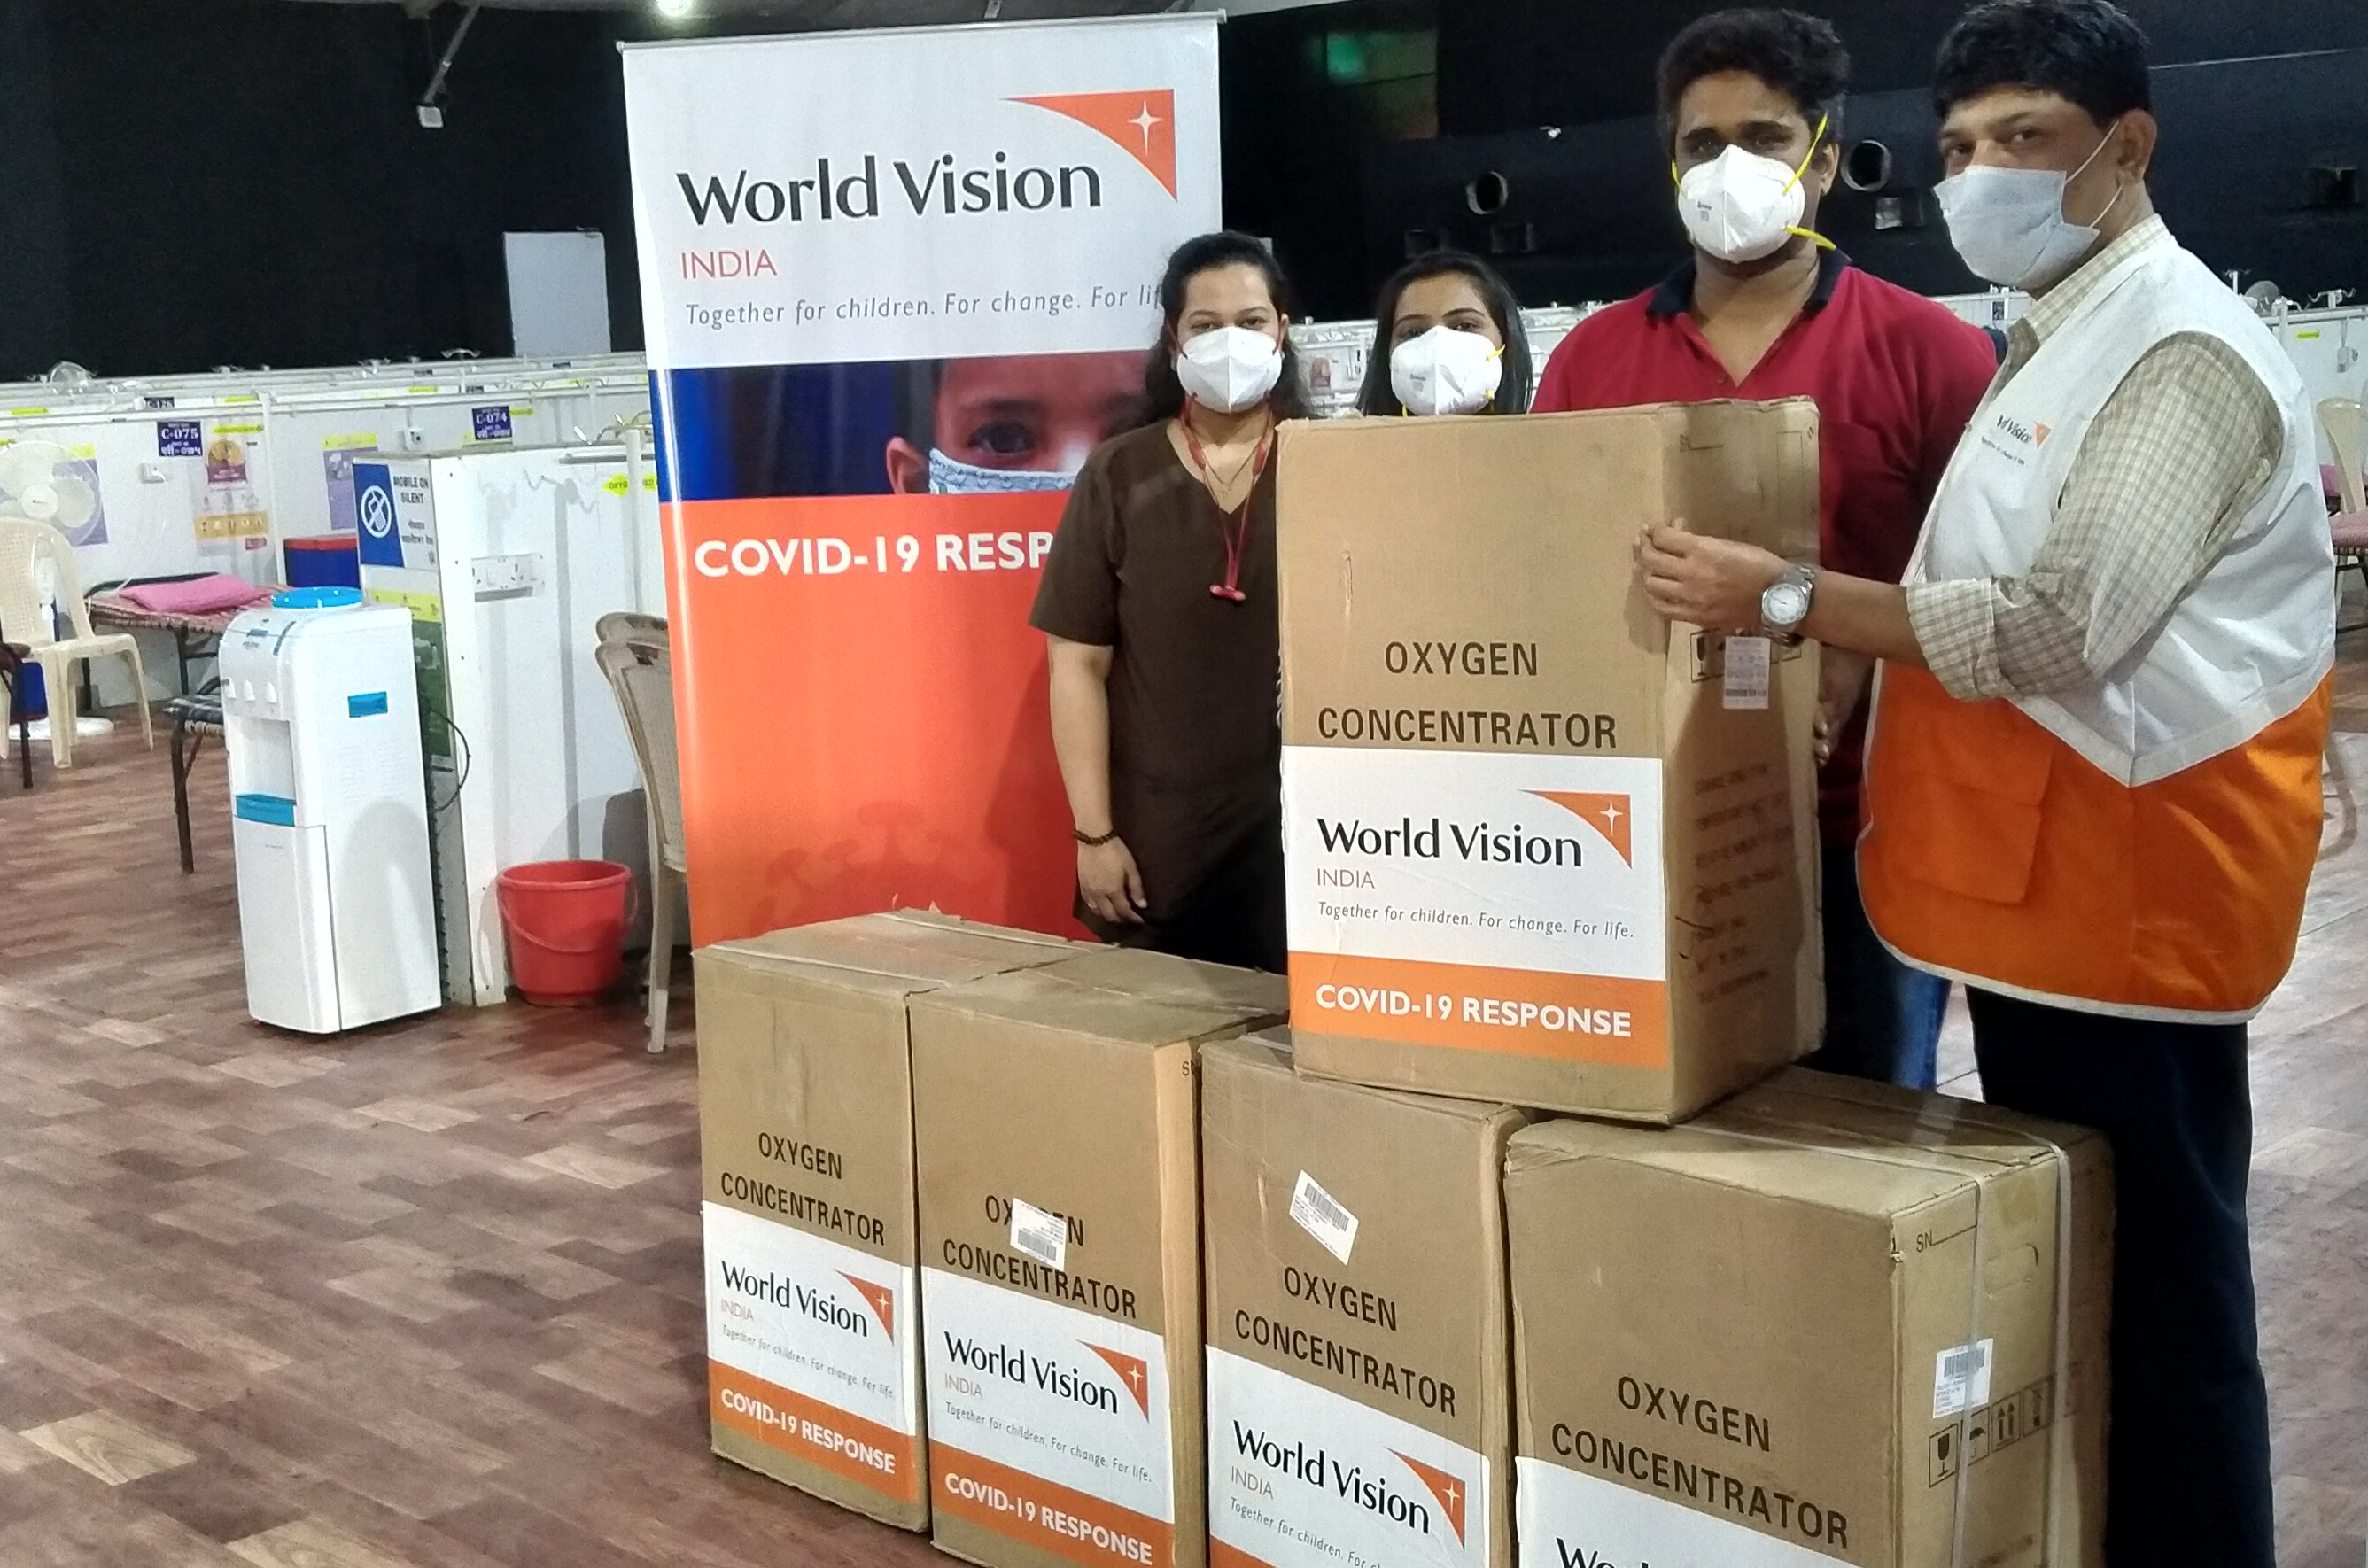 World Vision staff with COVID-19 equipment